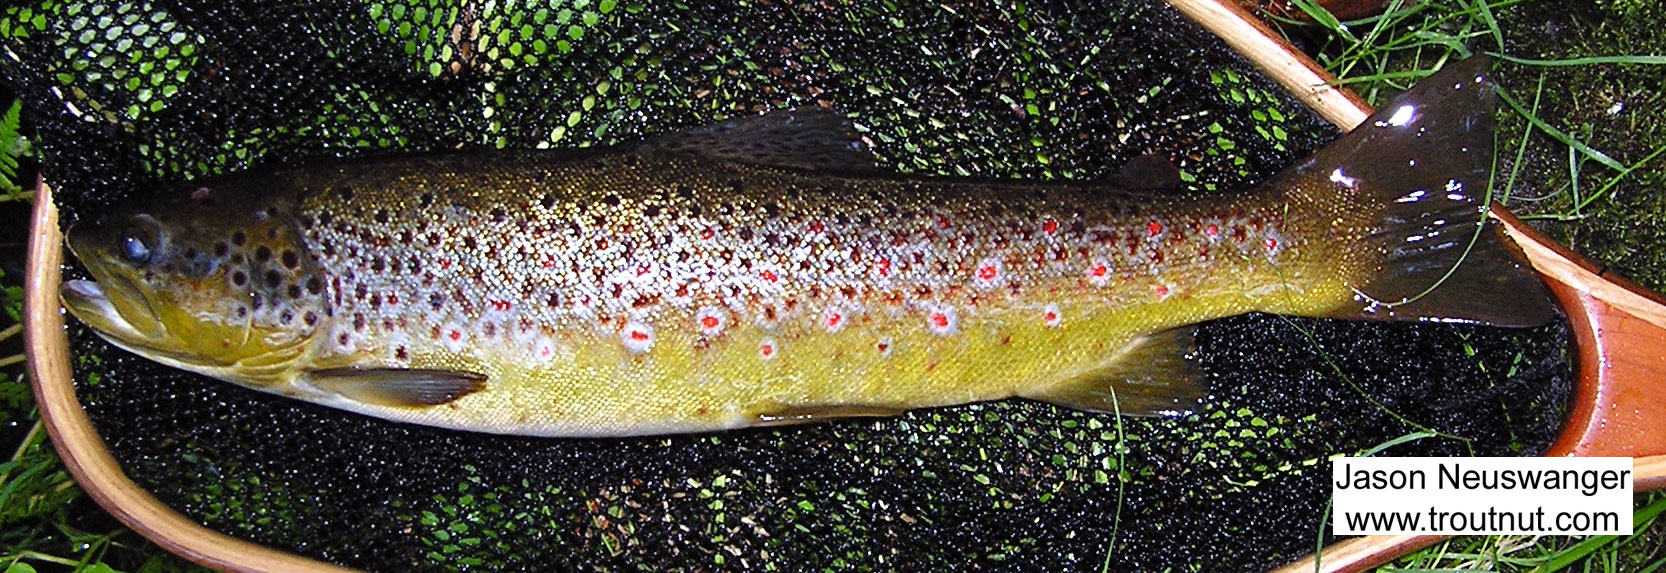 One of the best casts I've ever made rewarded me with this 18 inch brown on a size 16 foam beetle. I had to drop a backhand sidearm curve cast across the gathering current in the tail of a pool to place the beetle over the large, skittish trout rising sporadically against a log across the river.  It was more luck than skill, but rewarding nonetheless. From the Bois Brule River in Wisconsin.